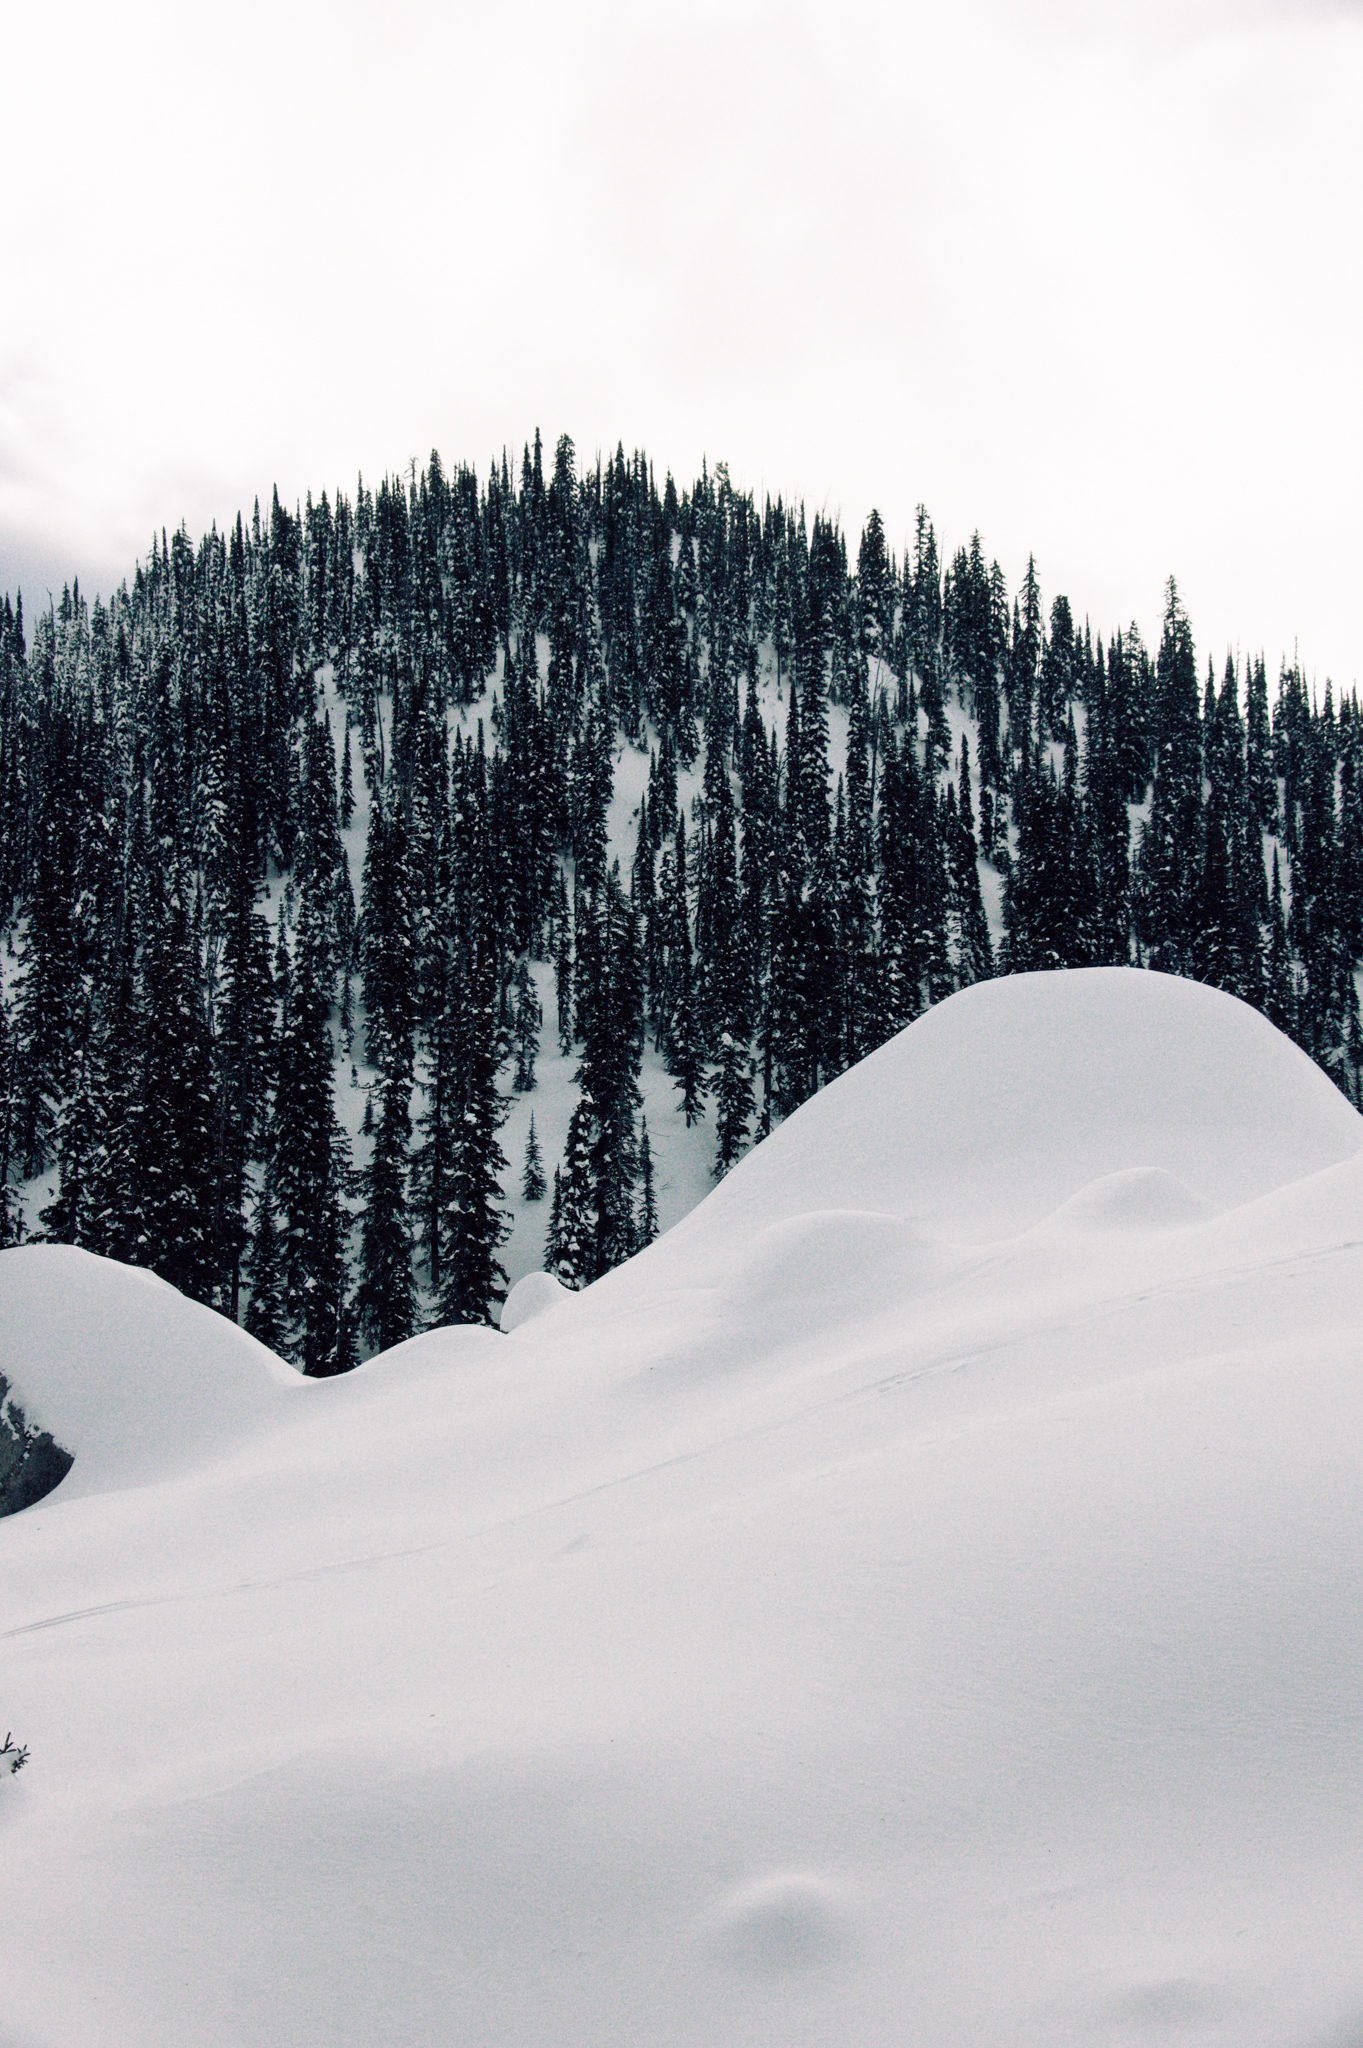 Pillow formations in the Fernie sidecountry.